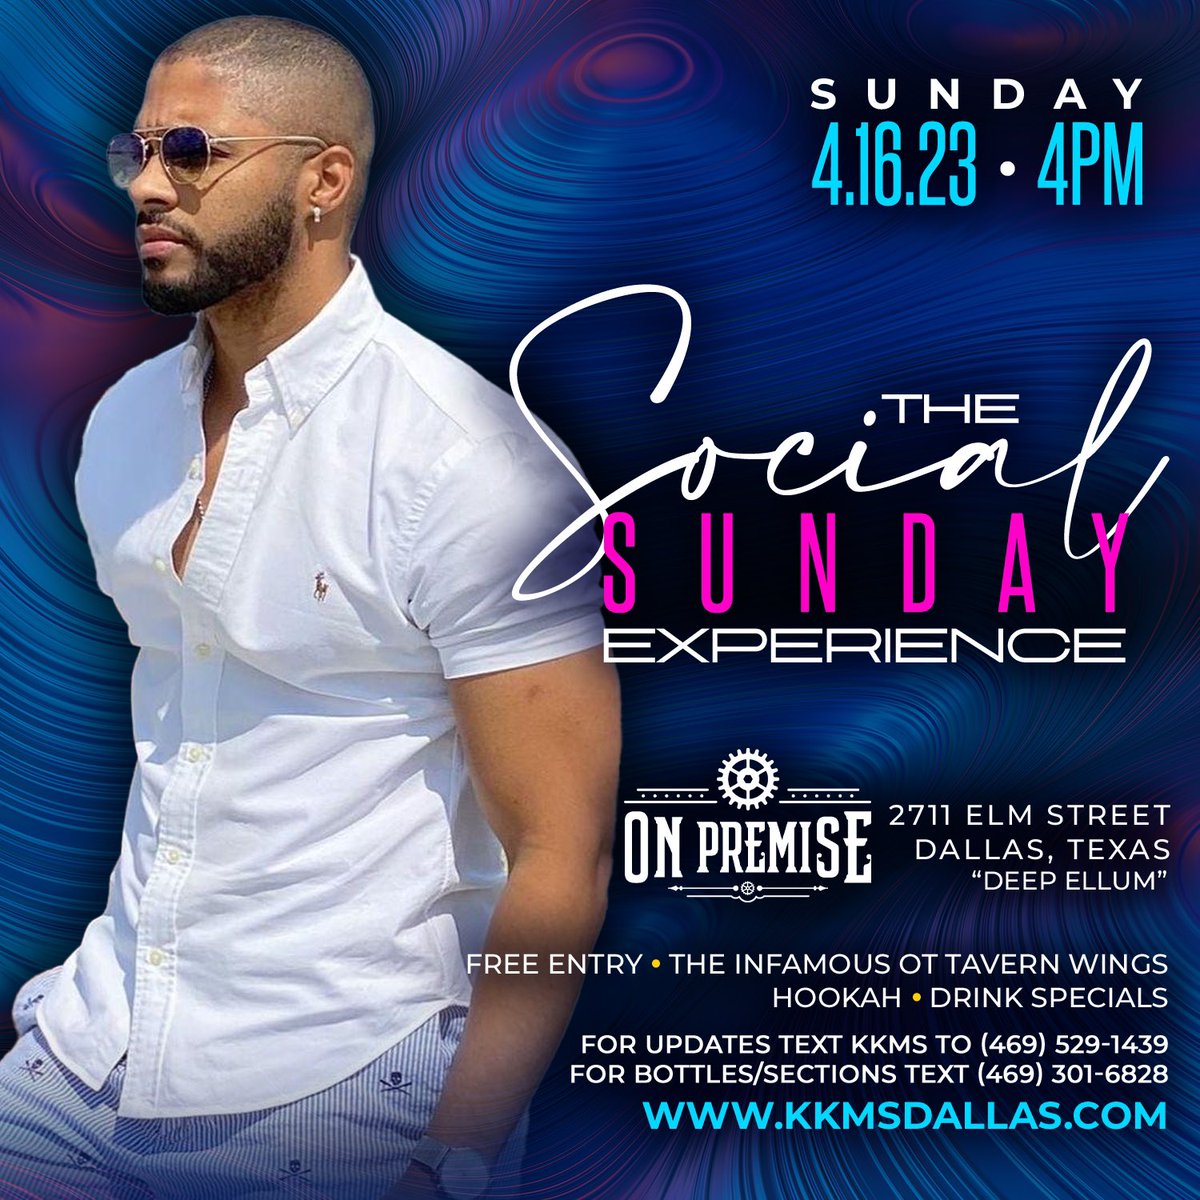 The Weekend In Dallas, Texas with KKMS … 

FRIDAY, April 14th FRIENDS FRIDAY
SUNDAY, April 16th THE Social Sunday 

Sections & Bottle Service Available kkmsdallas.com

#KKMS #TheDistinguishedGents #DALLAS